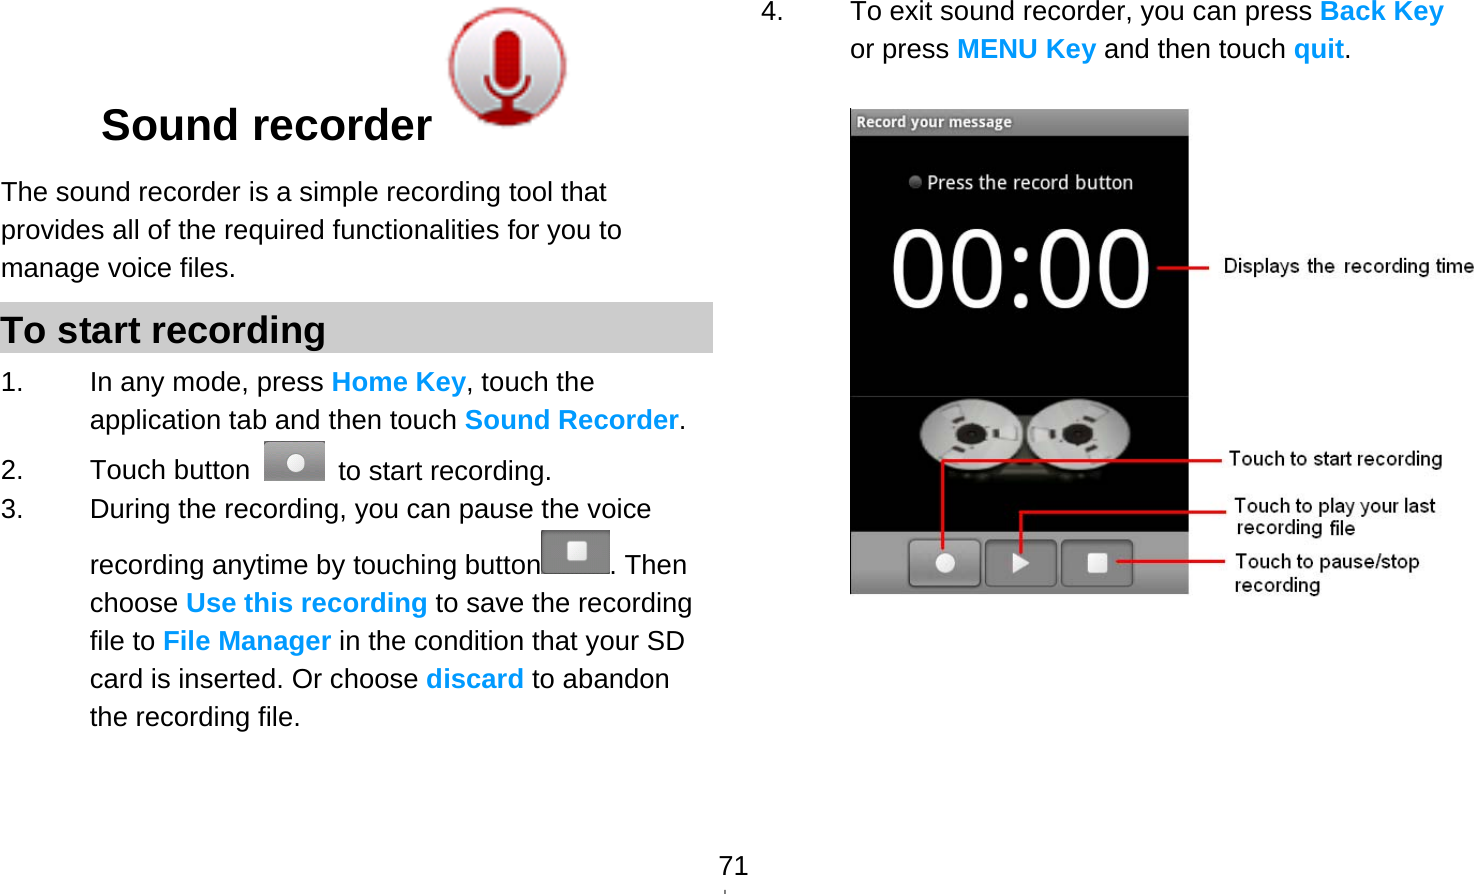   71Sound recorder  The sound recorder is a simple recording tool that provides all of the required functionalities for you to manage voice files. To start recording 1.  In any mode, press Home Key, touch the application tab and then touch Sound Recorder. 2. Touch button    to start recording. 3.  During the recording, you can pause the voice recording anytime by touching button . Then choose Use this recording to save the recording file to File Manager in the condition that your SD card is inserted. Or choose discard to abandon the recording file.   4.  To exit sound recorder, you can press Back Key or press MENU Key and then touch quit.    